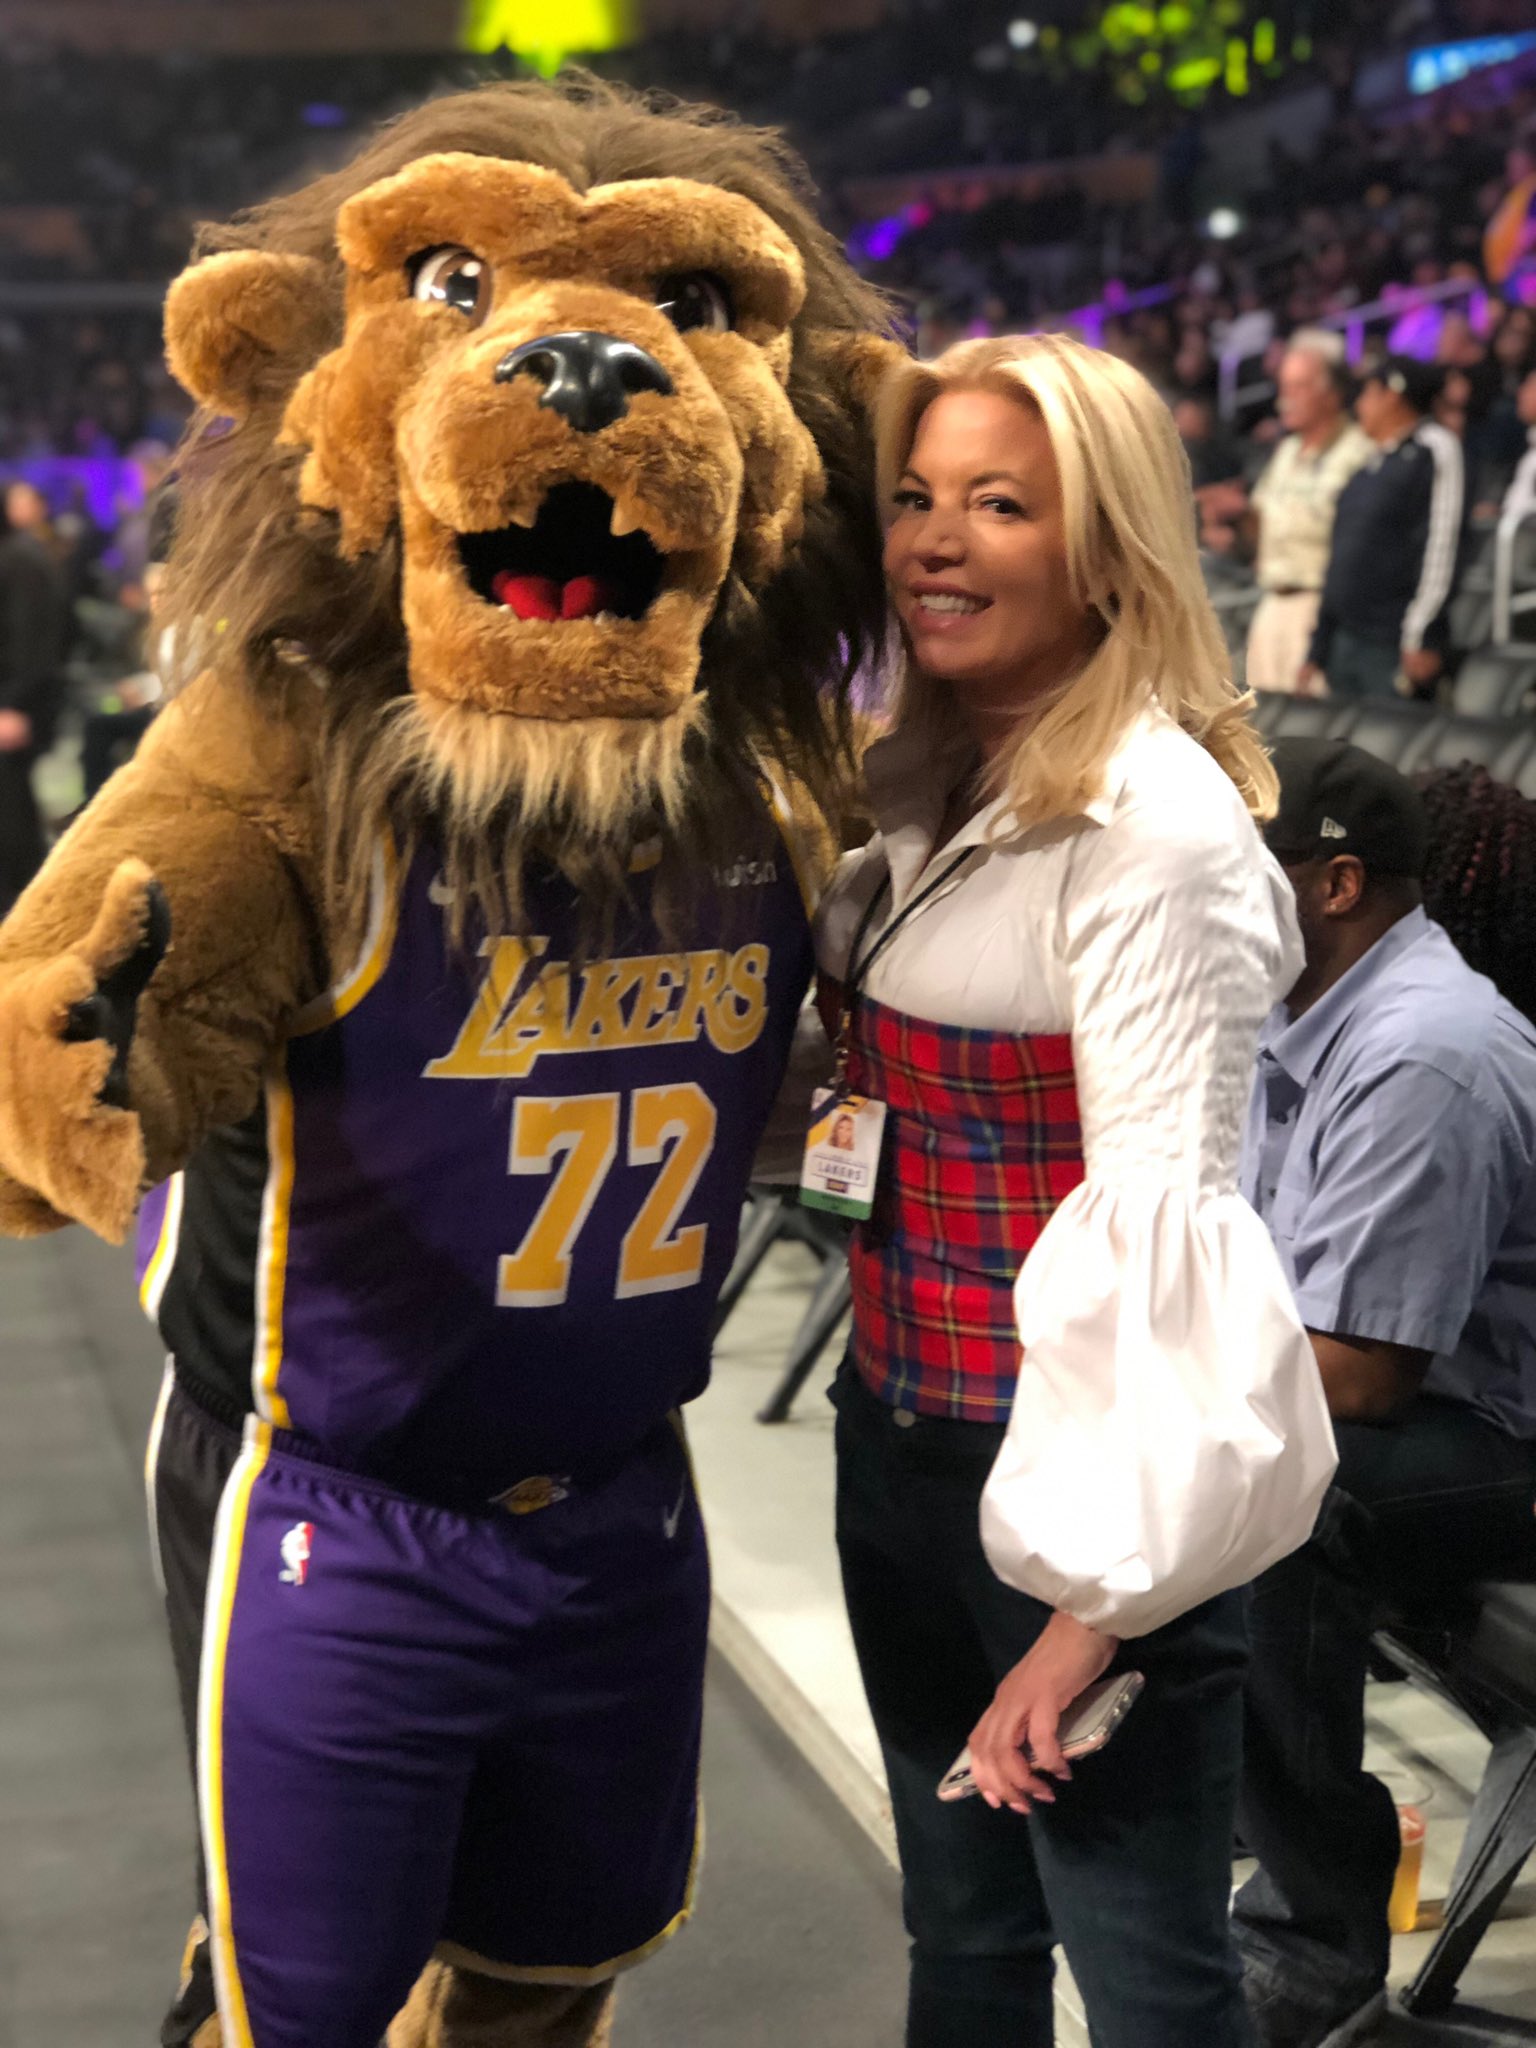 Los Angeles Lakers on X: Big thanks to our friends, the @LAKings